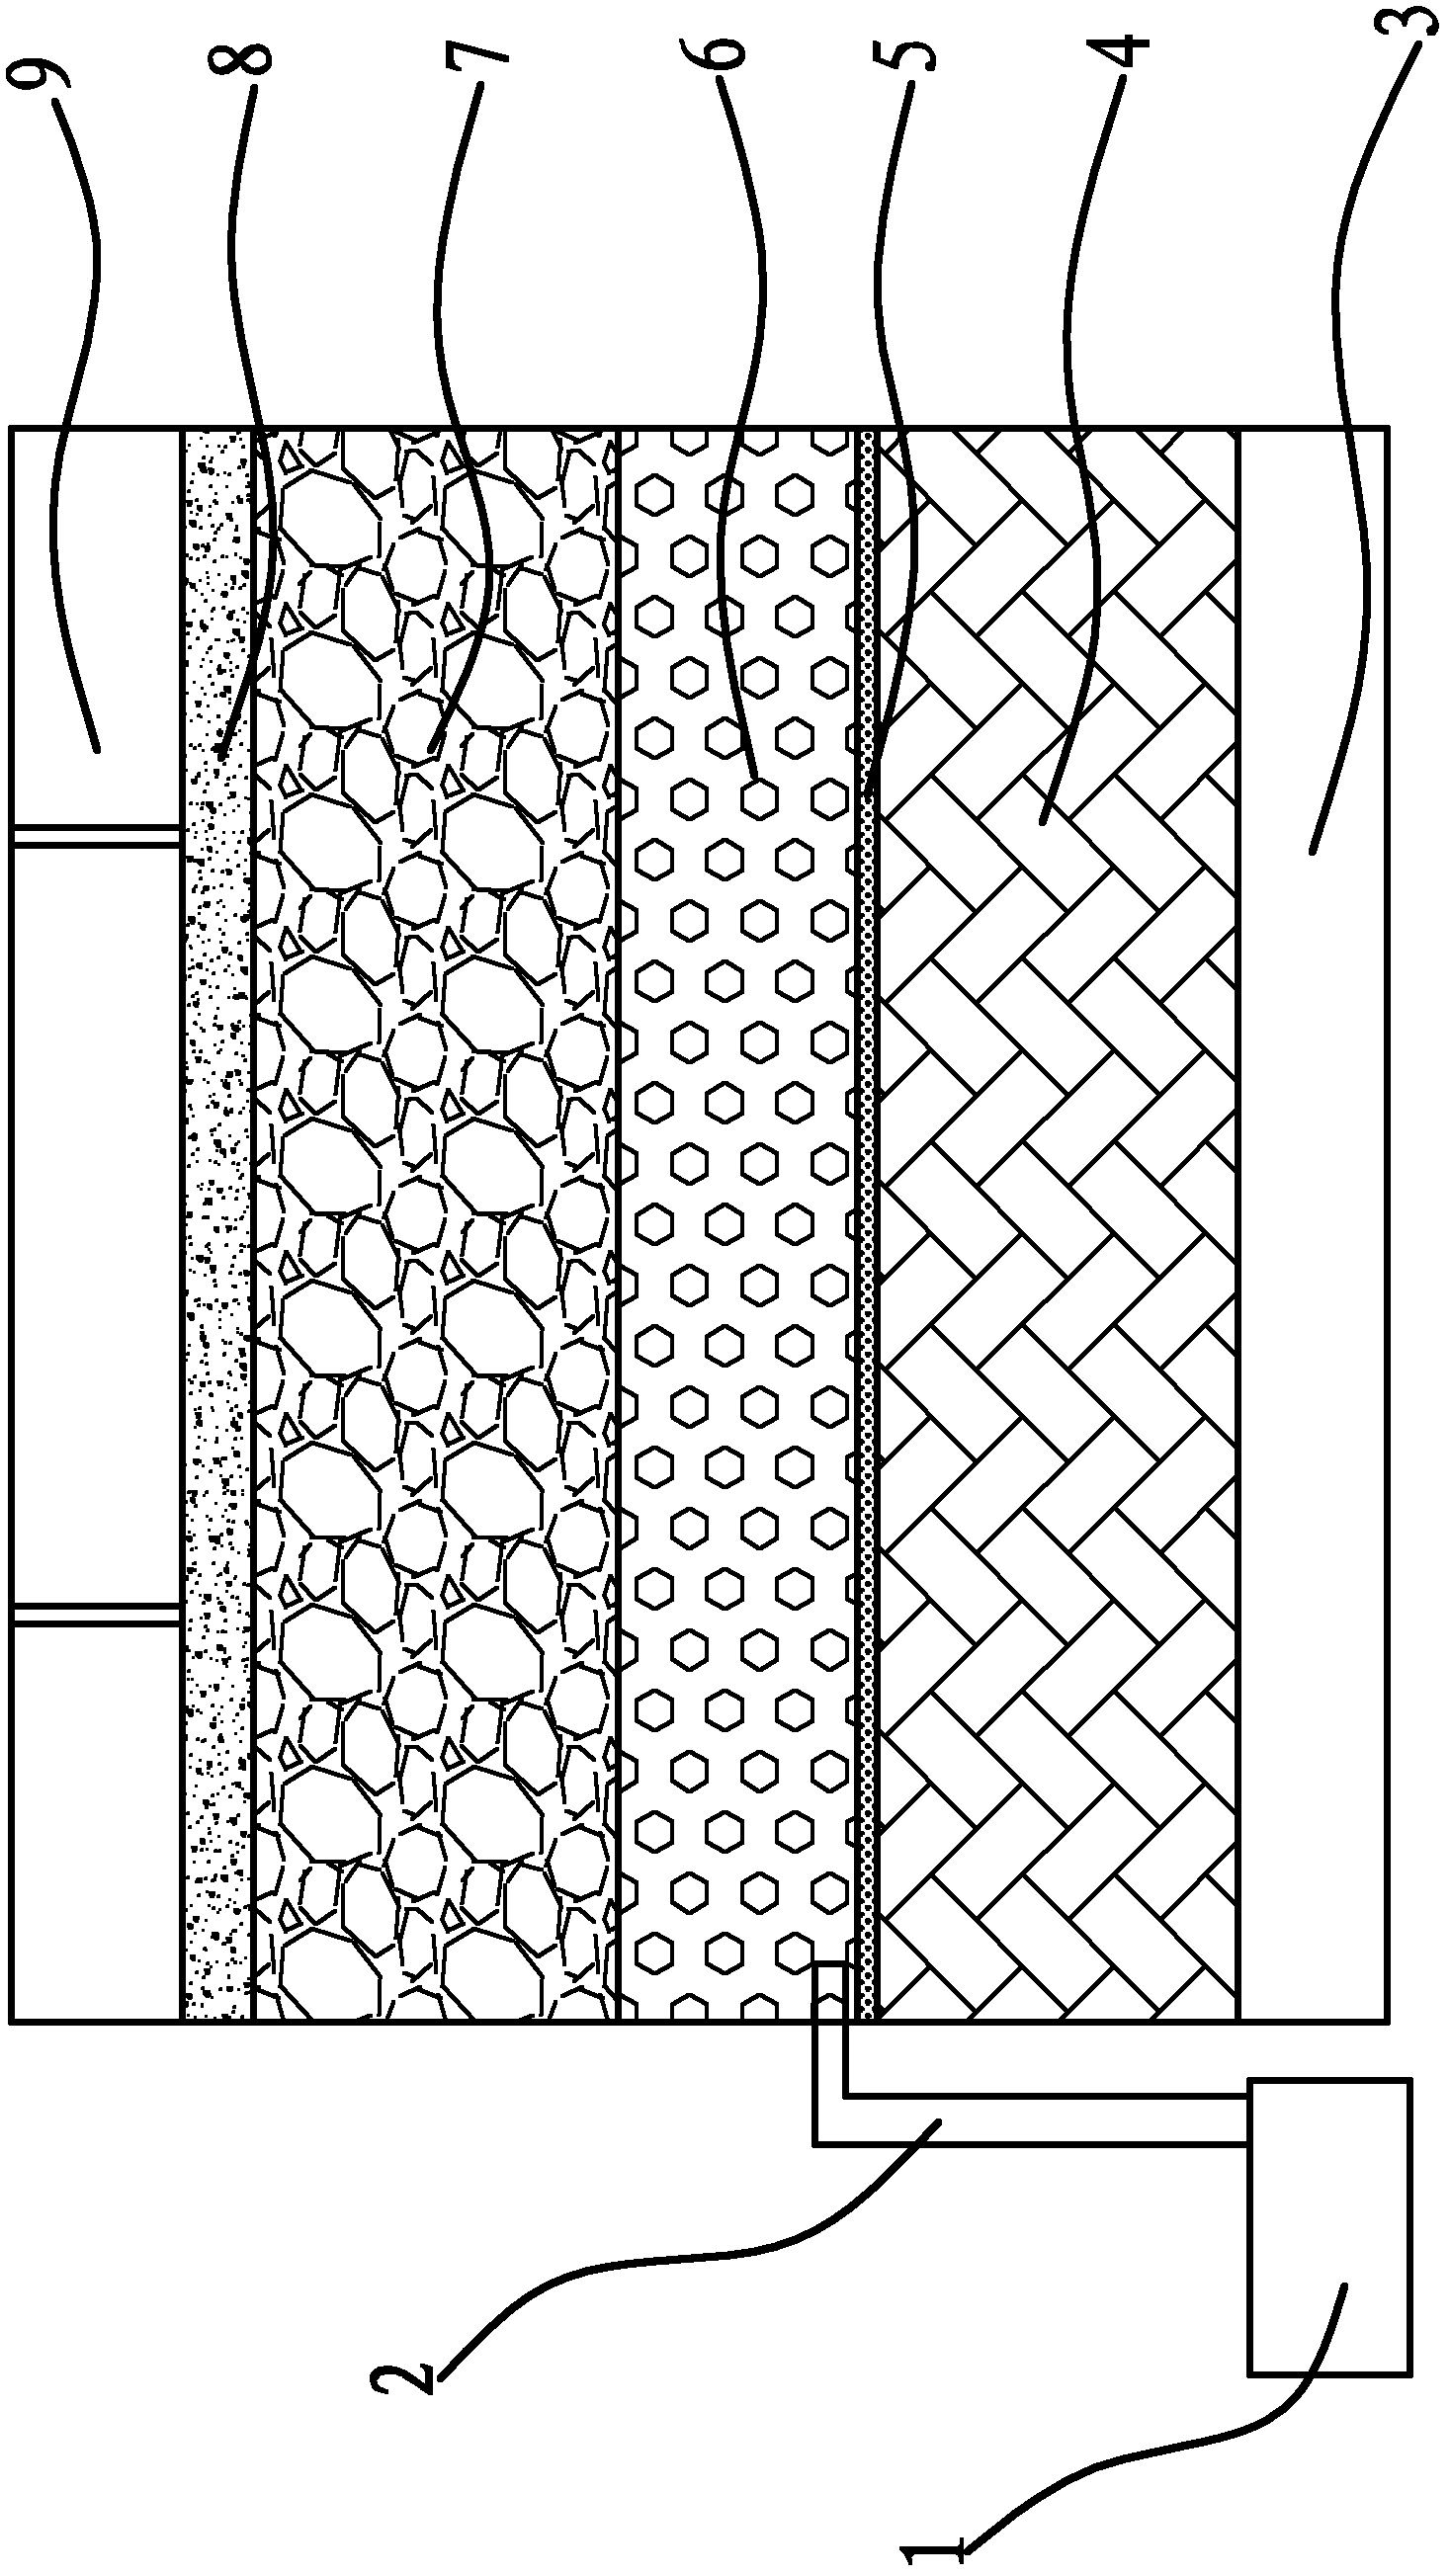 Ecotypic water-permeable stratum structure